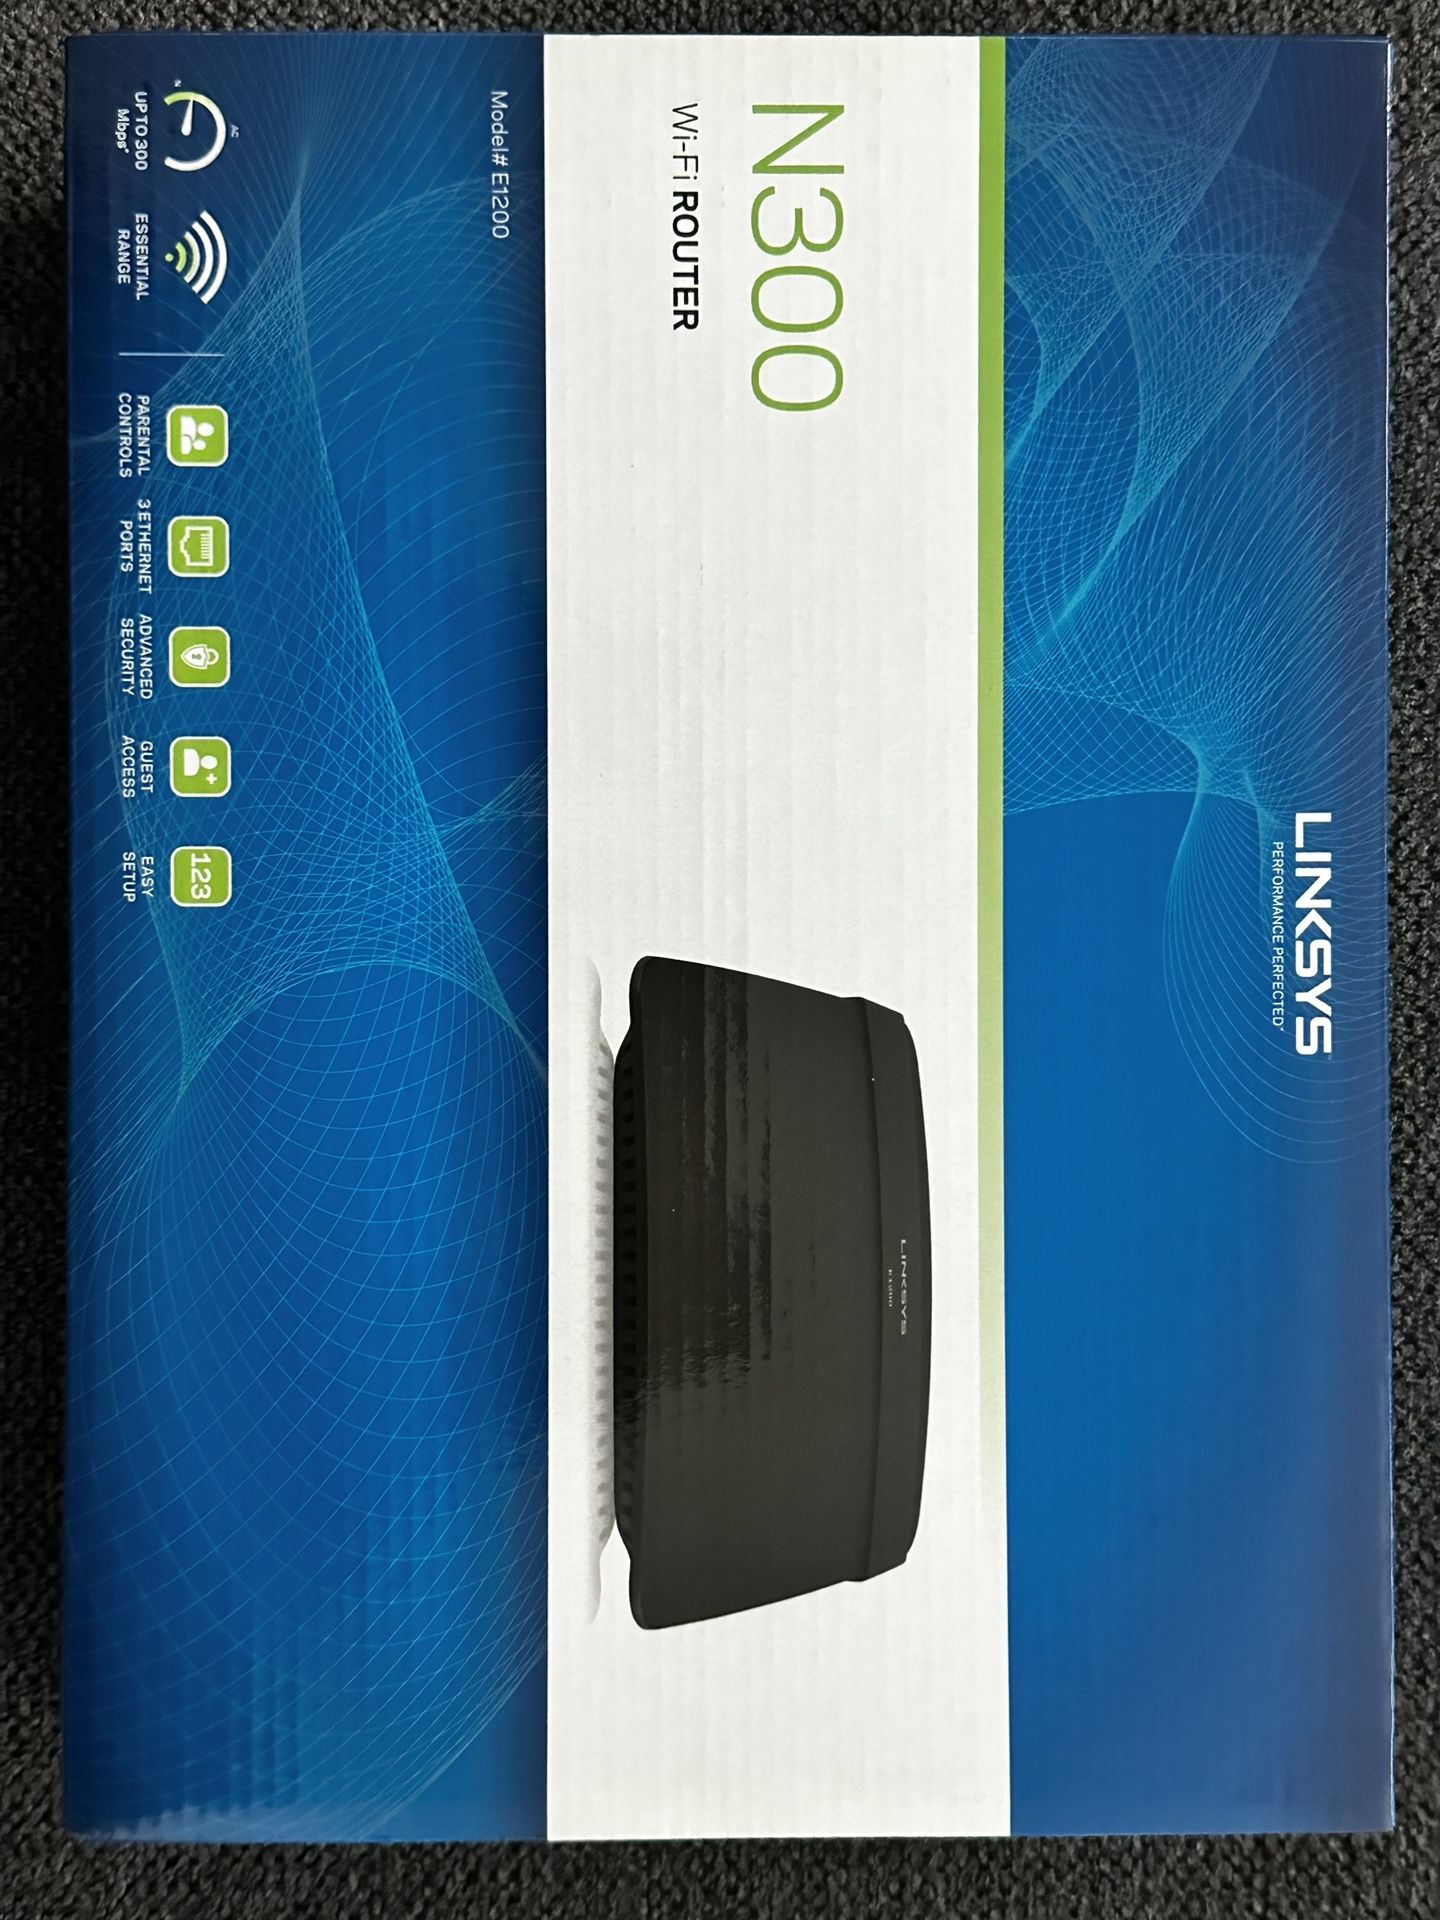 Linksys N300 Wi-Fi Router 